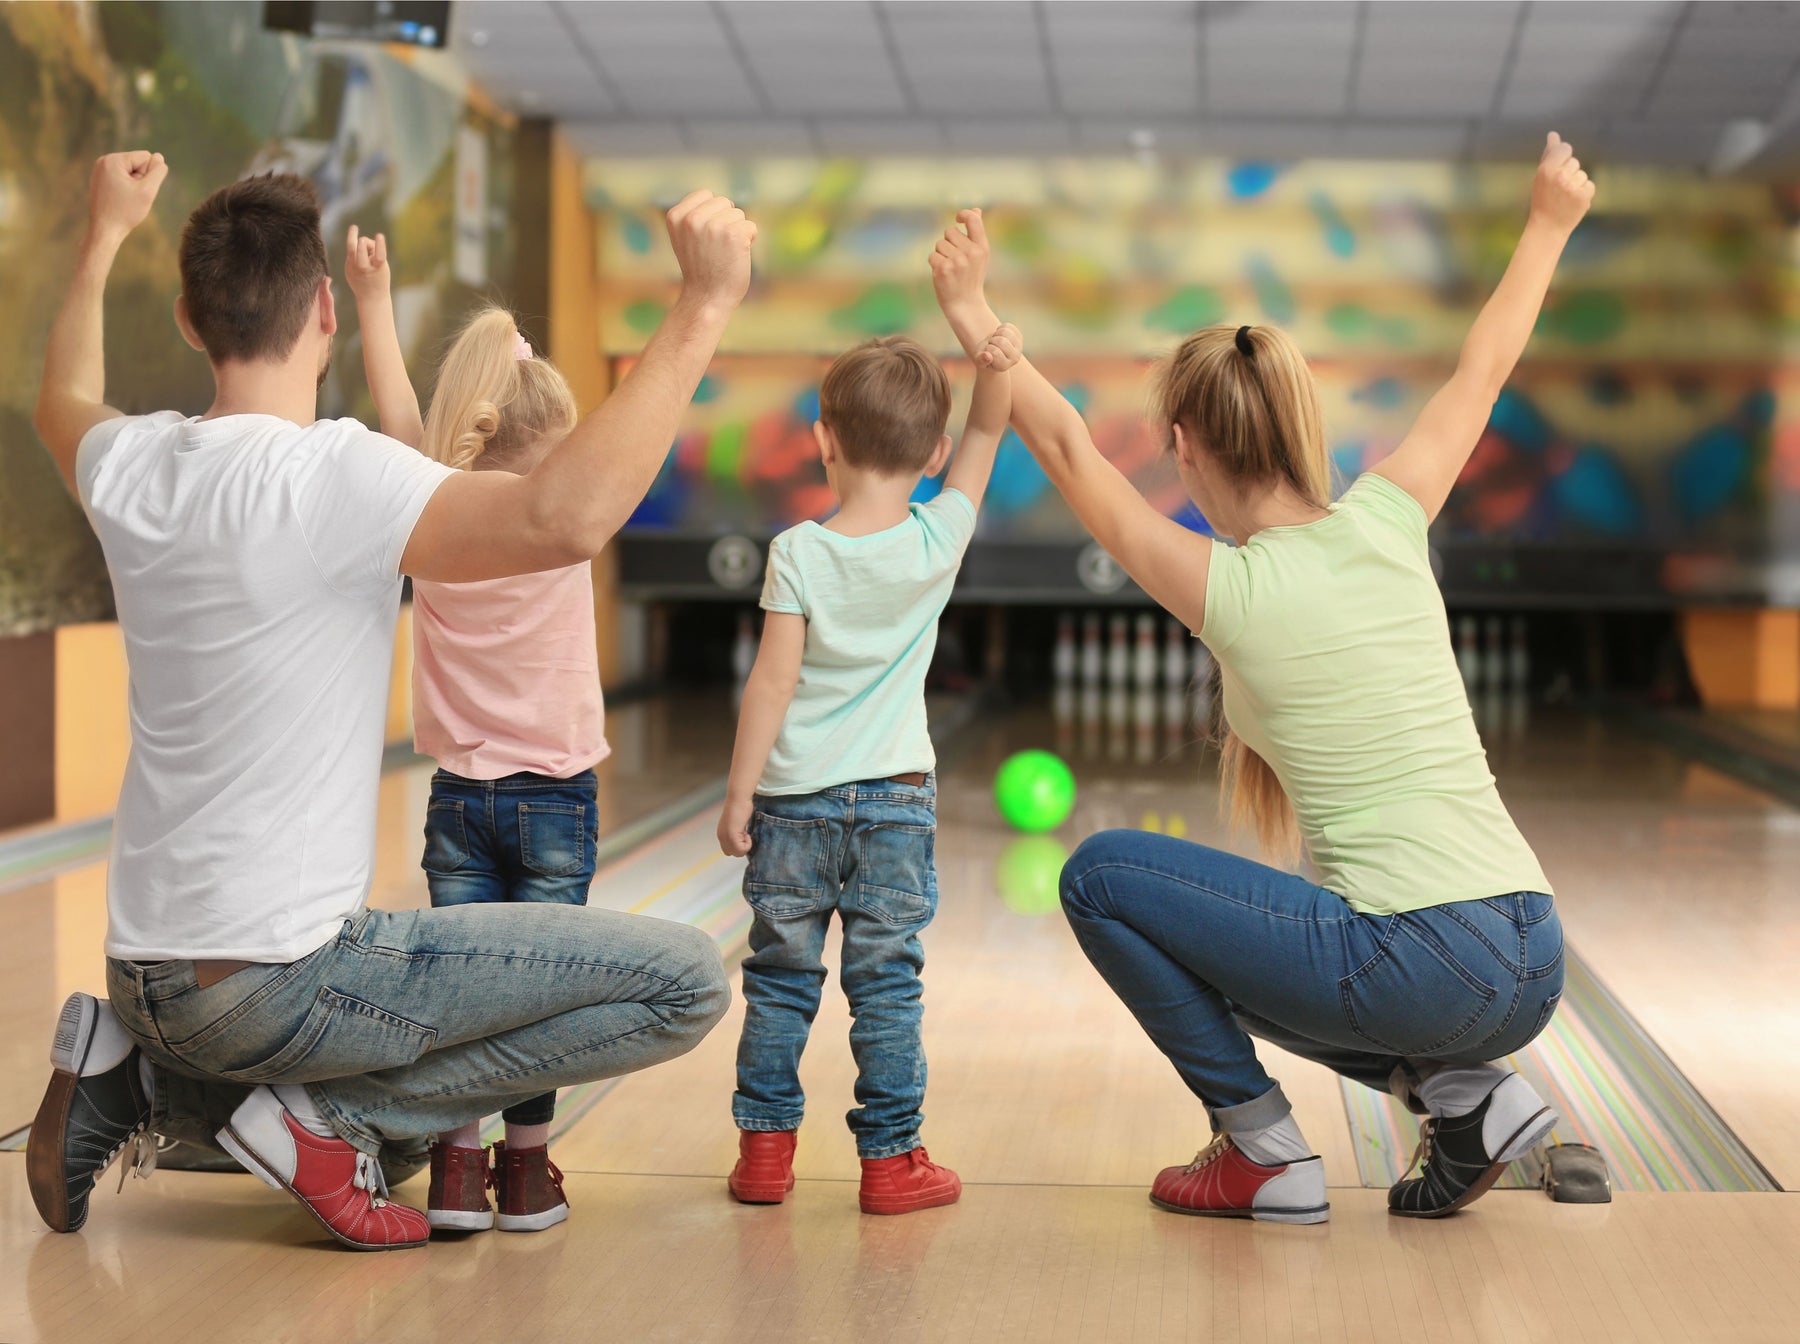 Top Reasons Why Bowling Night is a Fun Family Activity